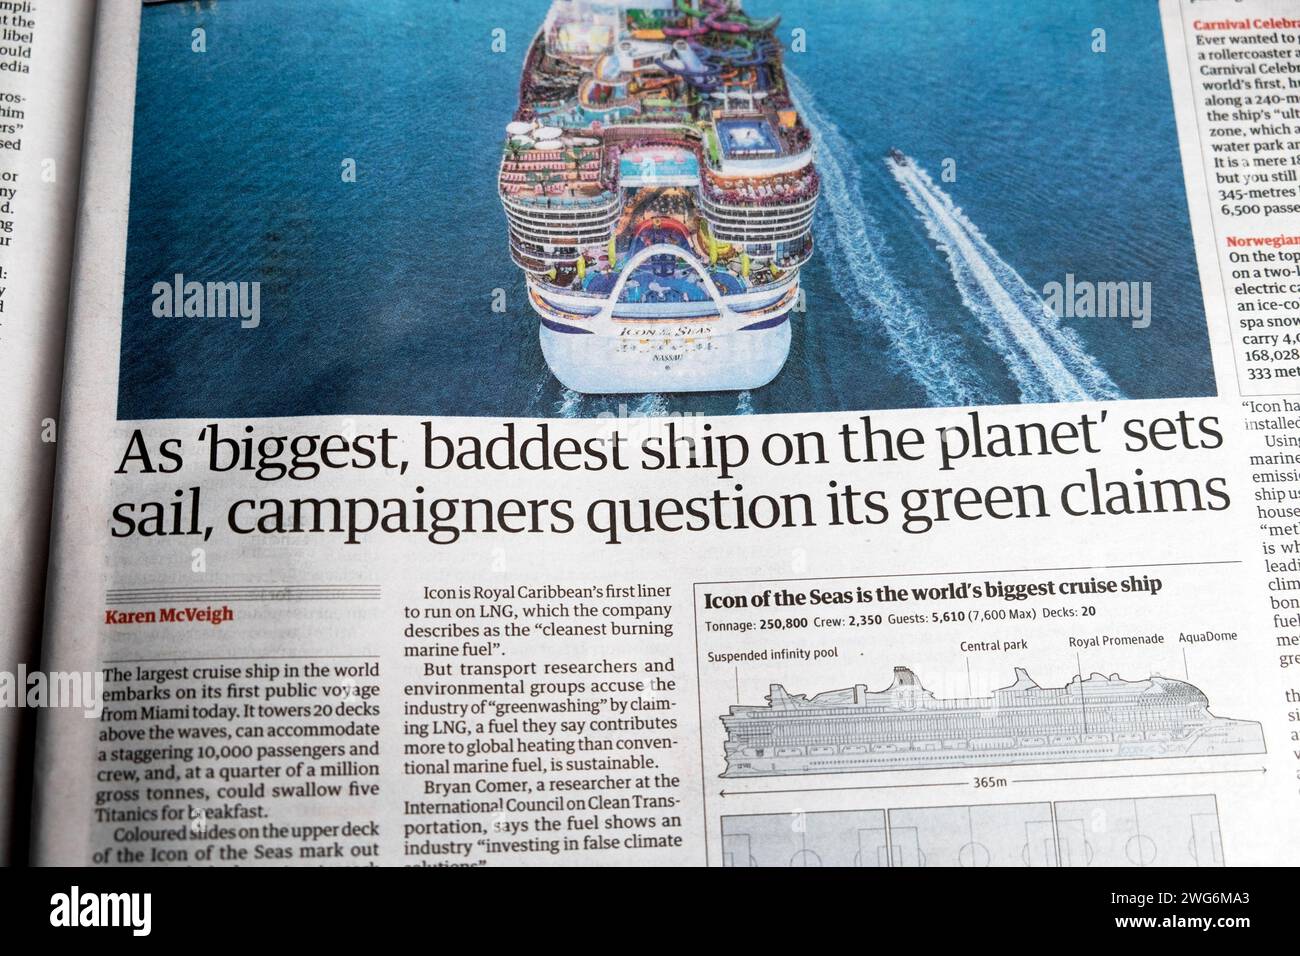 As 'biggest, baddest ship on the planet' sets sail, campaigners question its green claims' Guardian newspaper headline greenwashing article London UK Stock Photo